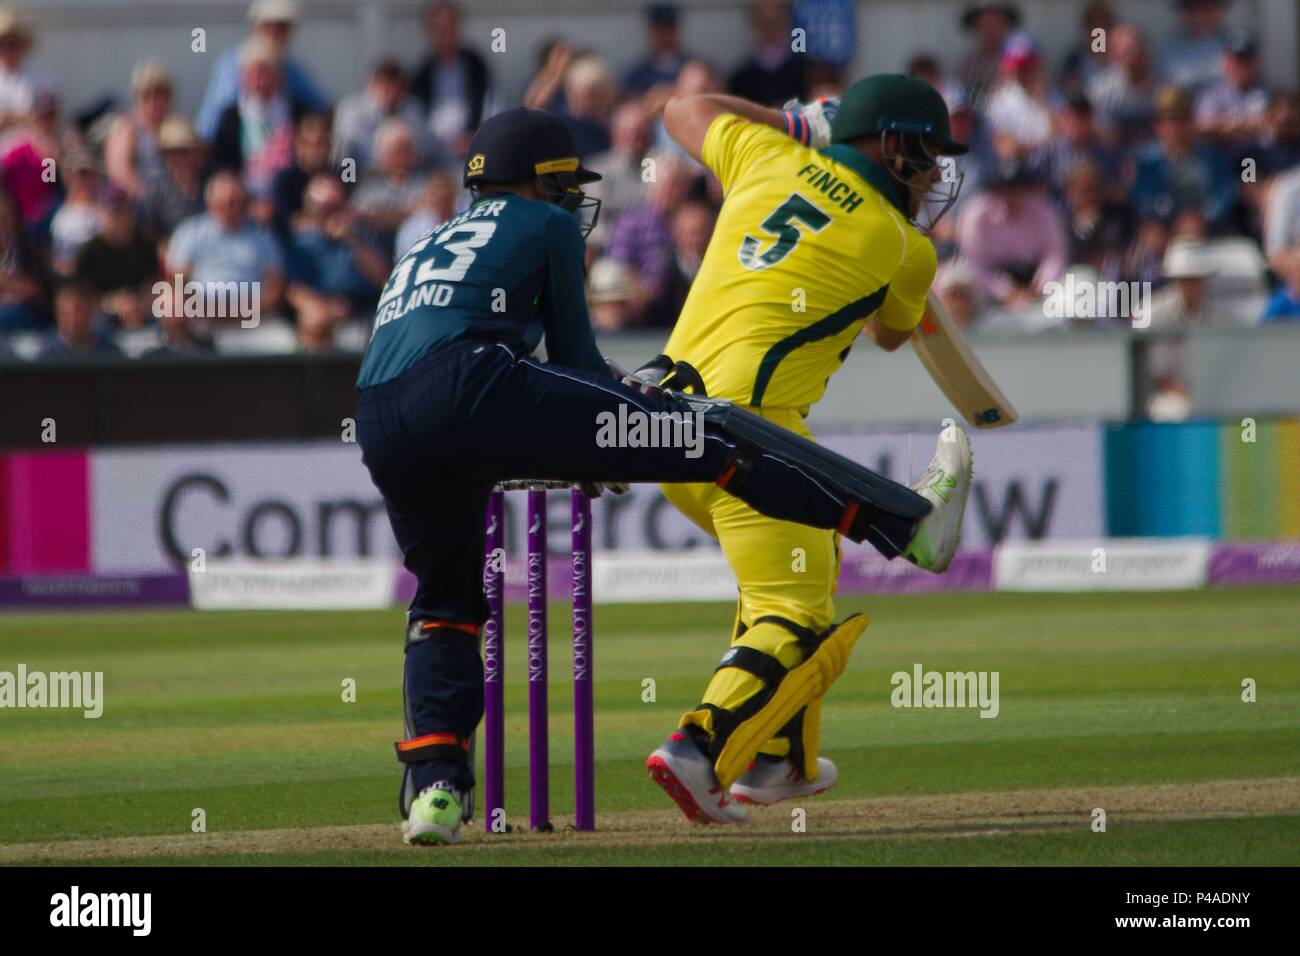 Chester-le-Street, England 21 June 2018. Jos Buttler, keeping wicket for England raises a leg as Aaron Finch bats for Australia in the fourth ODI at Emirates Riverside.  Credit: Colin Edwards/Alamy Live News. Stock Photo